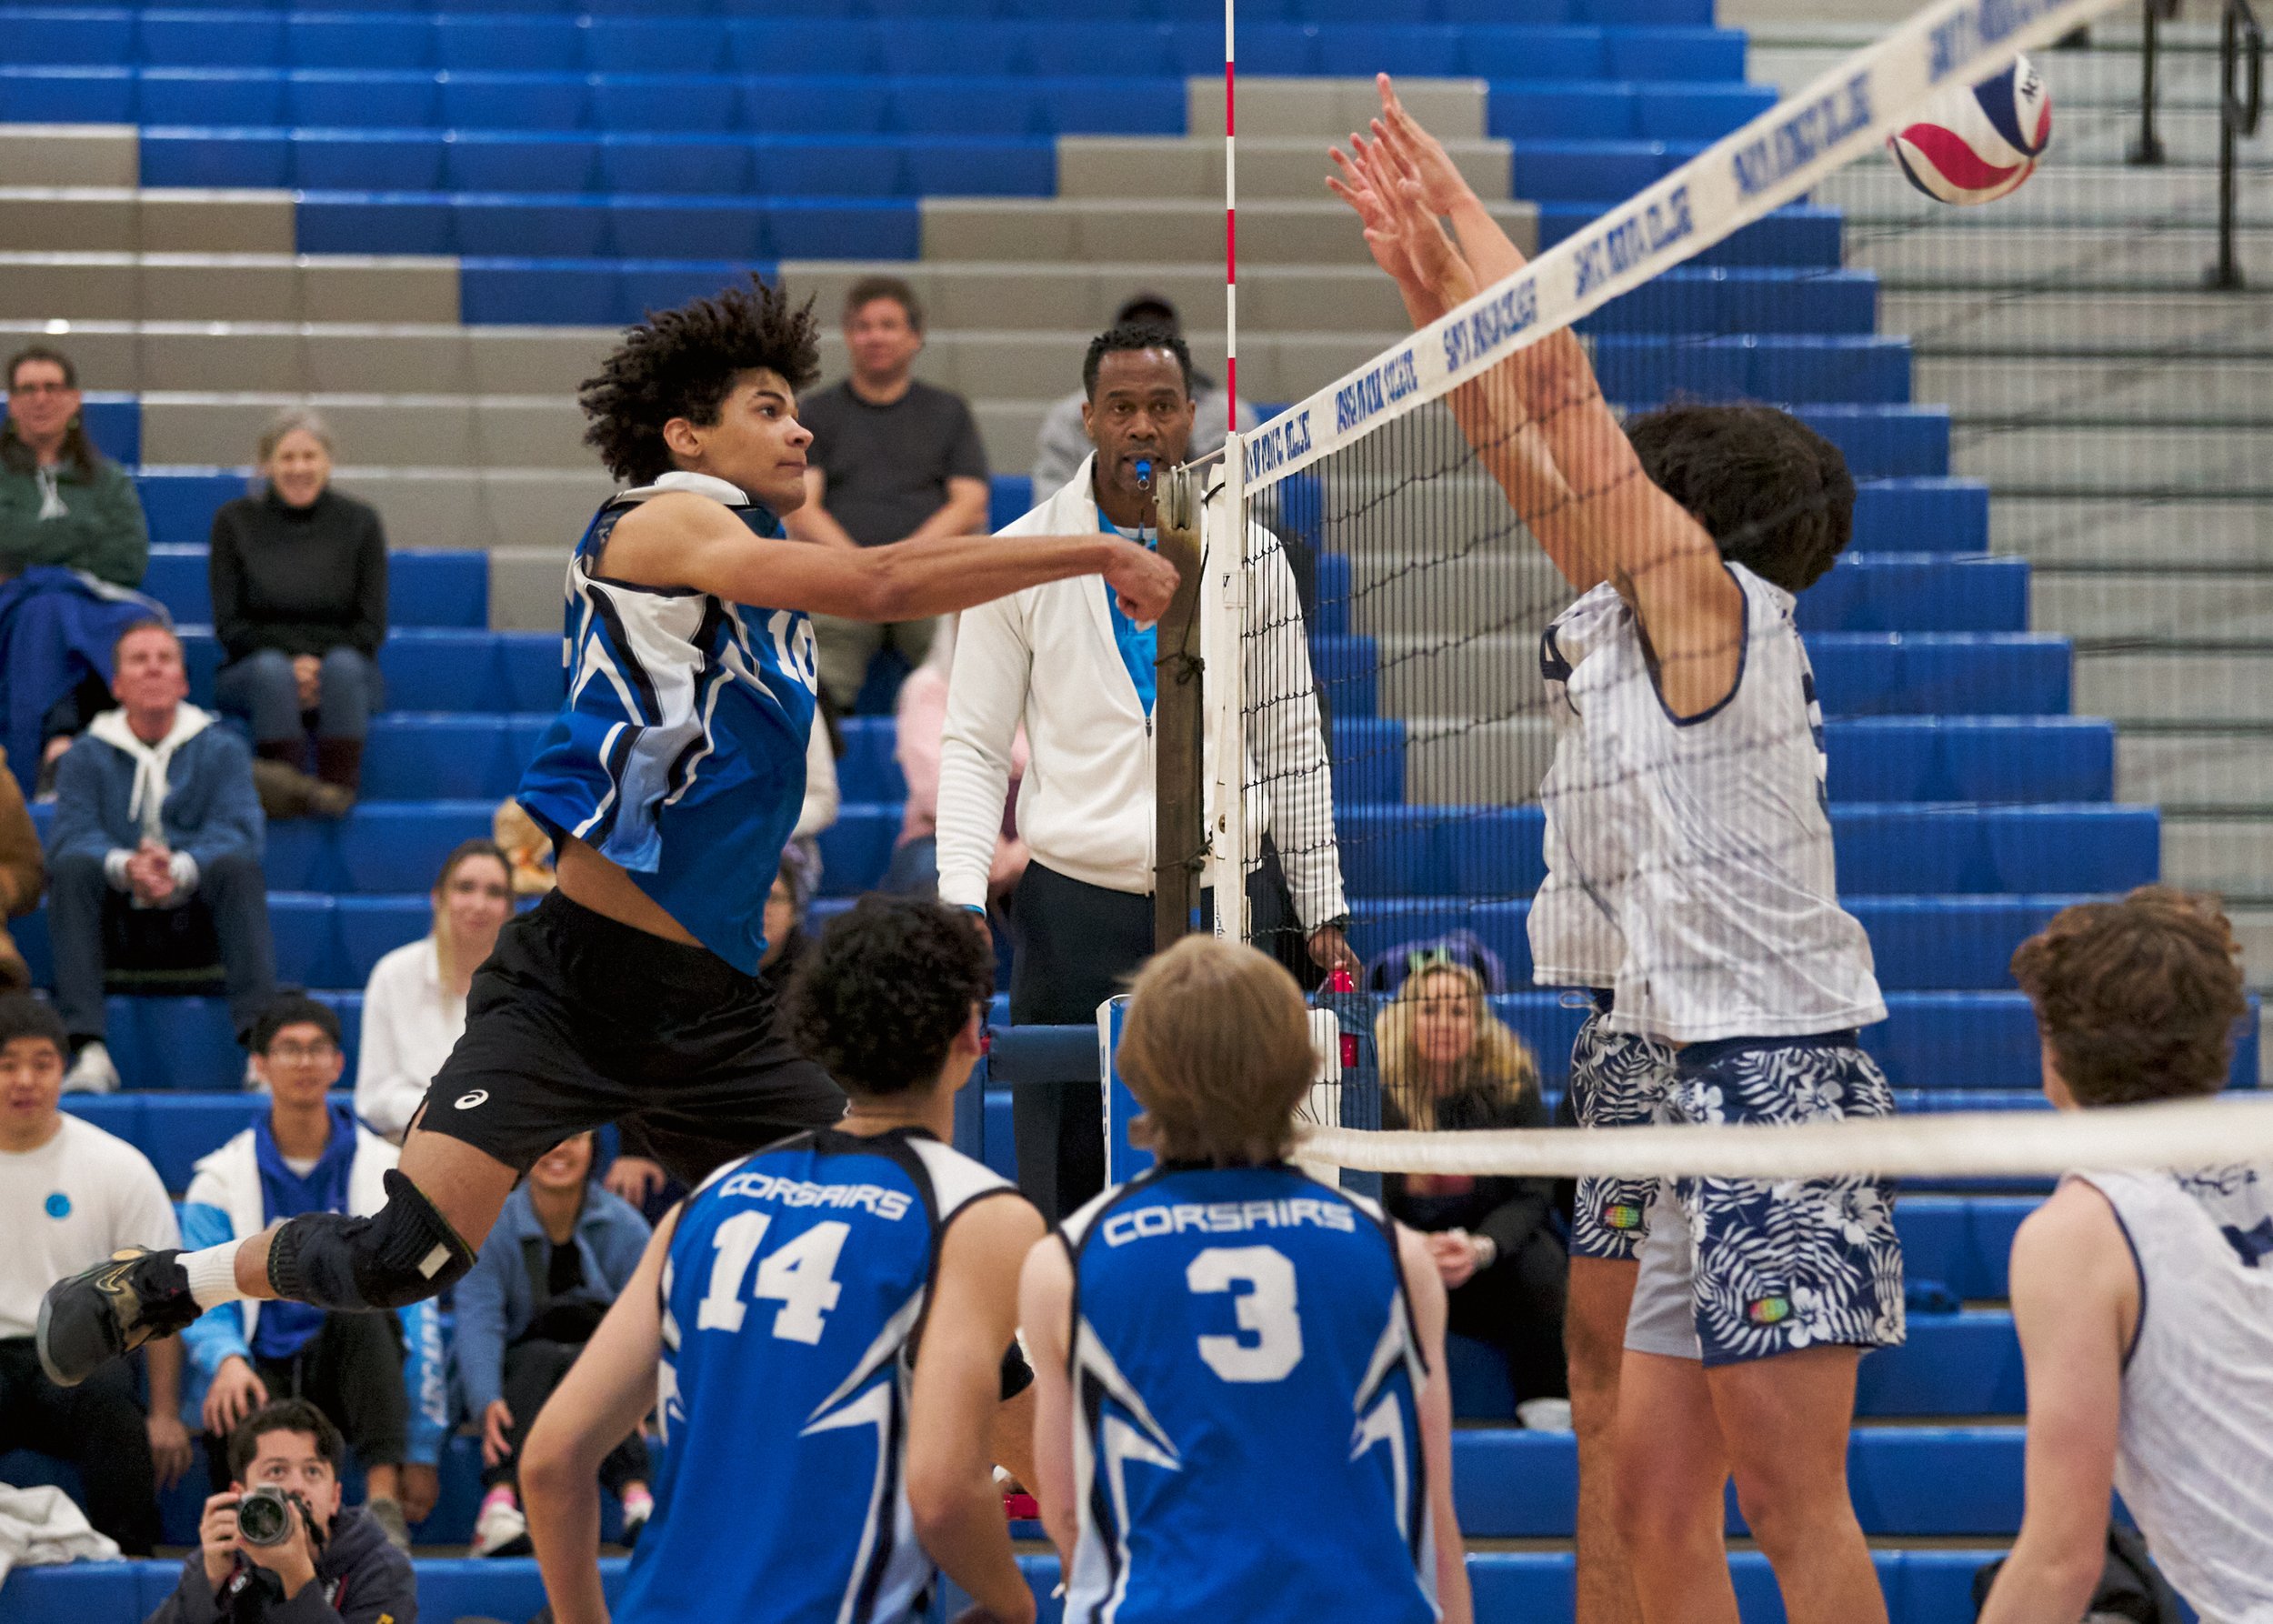  Santa Monica College Corsairs' Nate Davis sends the ball past Irvine Valley College Lasers' Julio Gutierrez (right) and Kaina Alvarez (rear right) during the men's volleyball match on Friday, Feb. 24, 2023, at Corsair Gym in Santa Monica, Calif. The